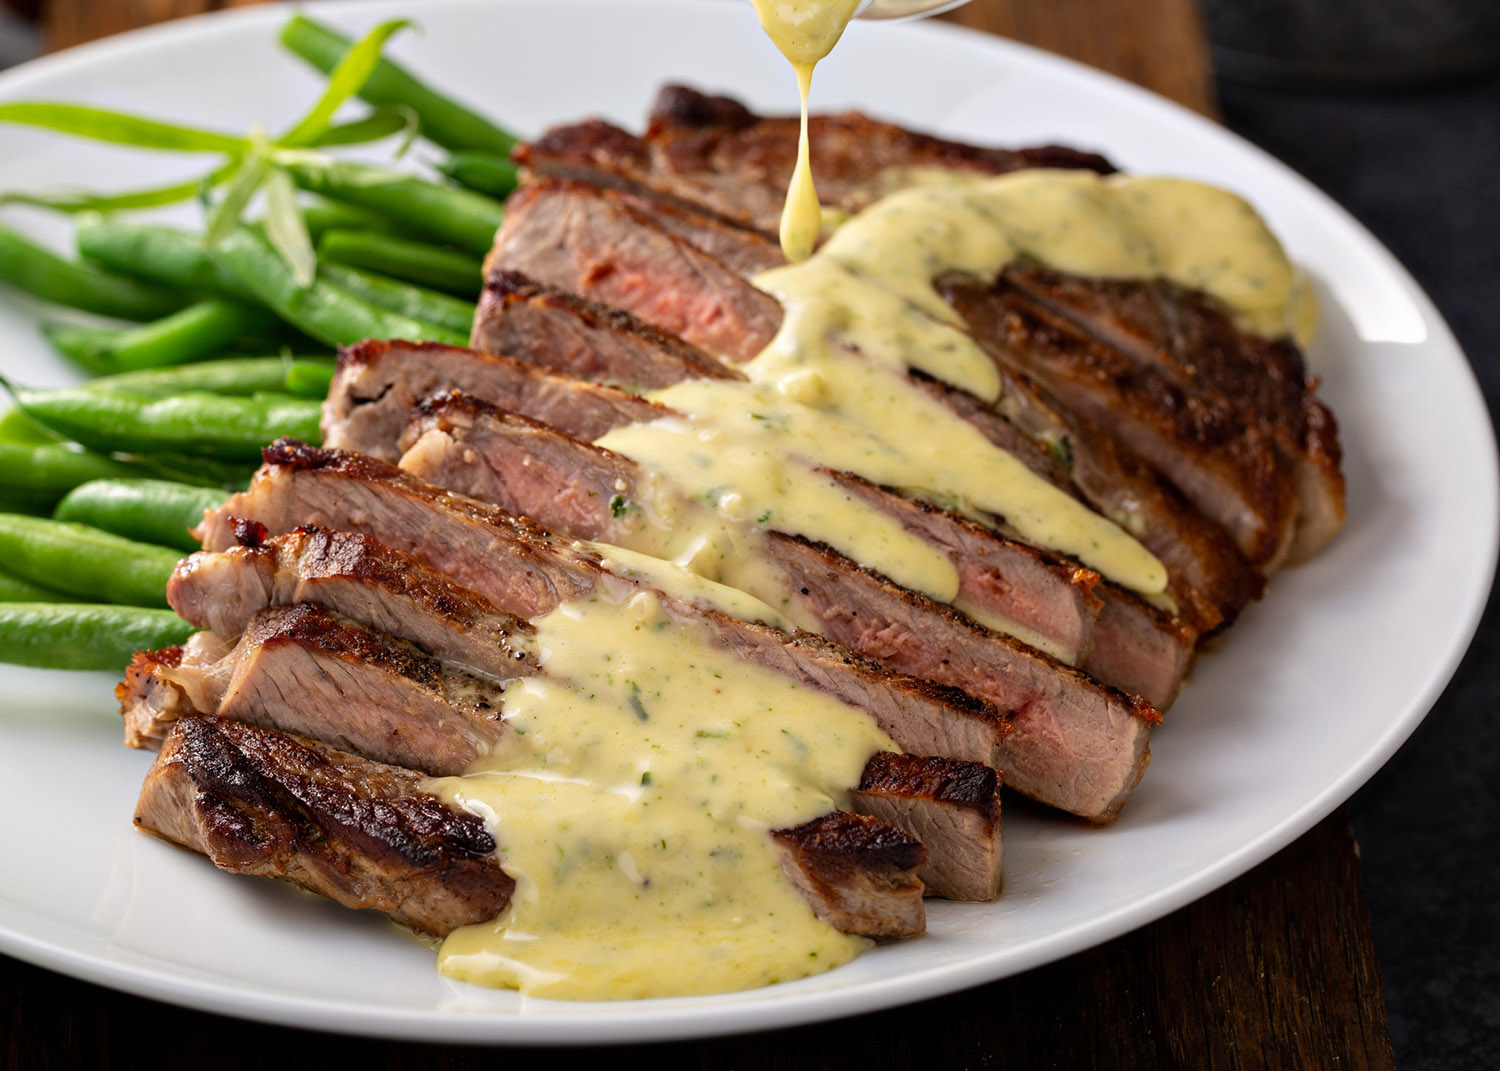 Steak with bearnaise sauce made with tarragon